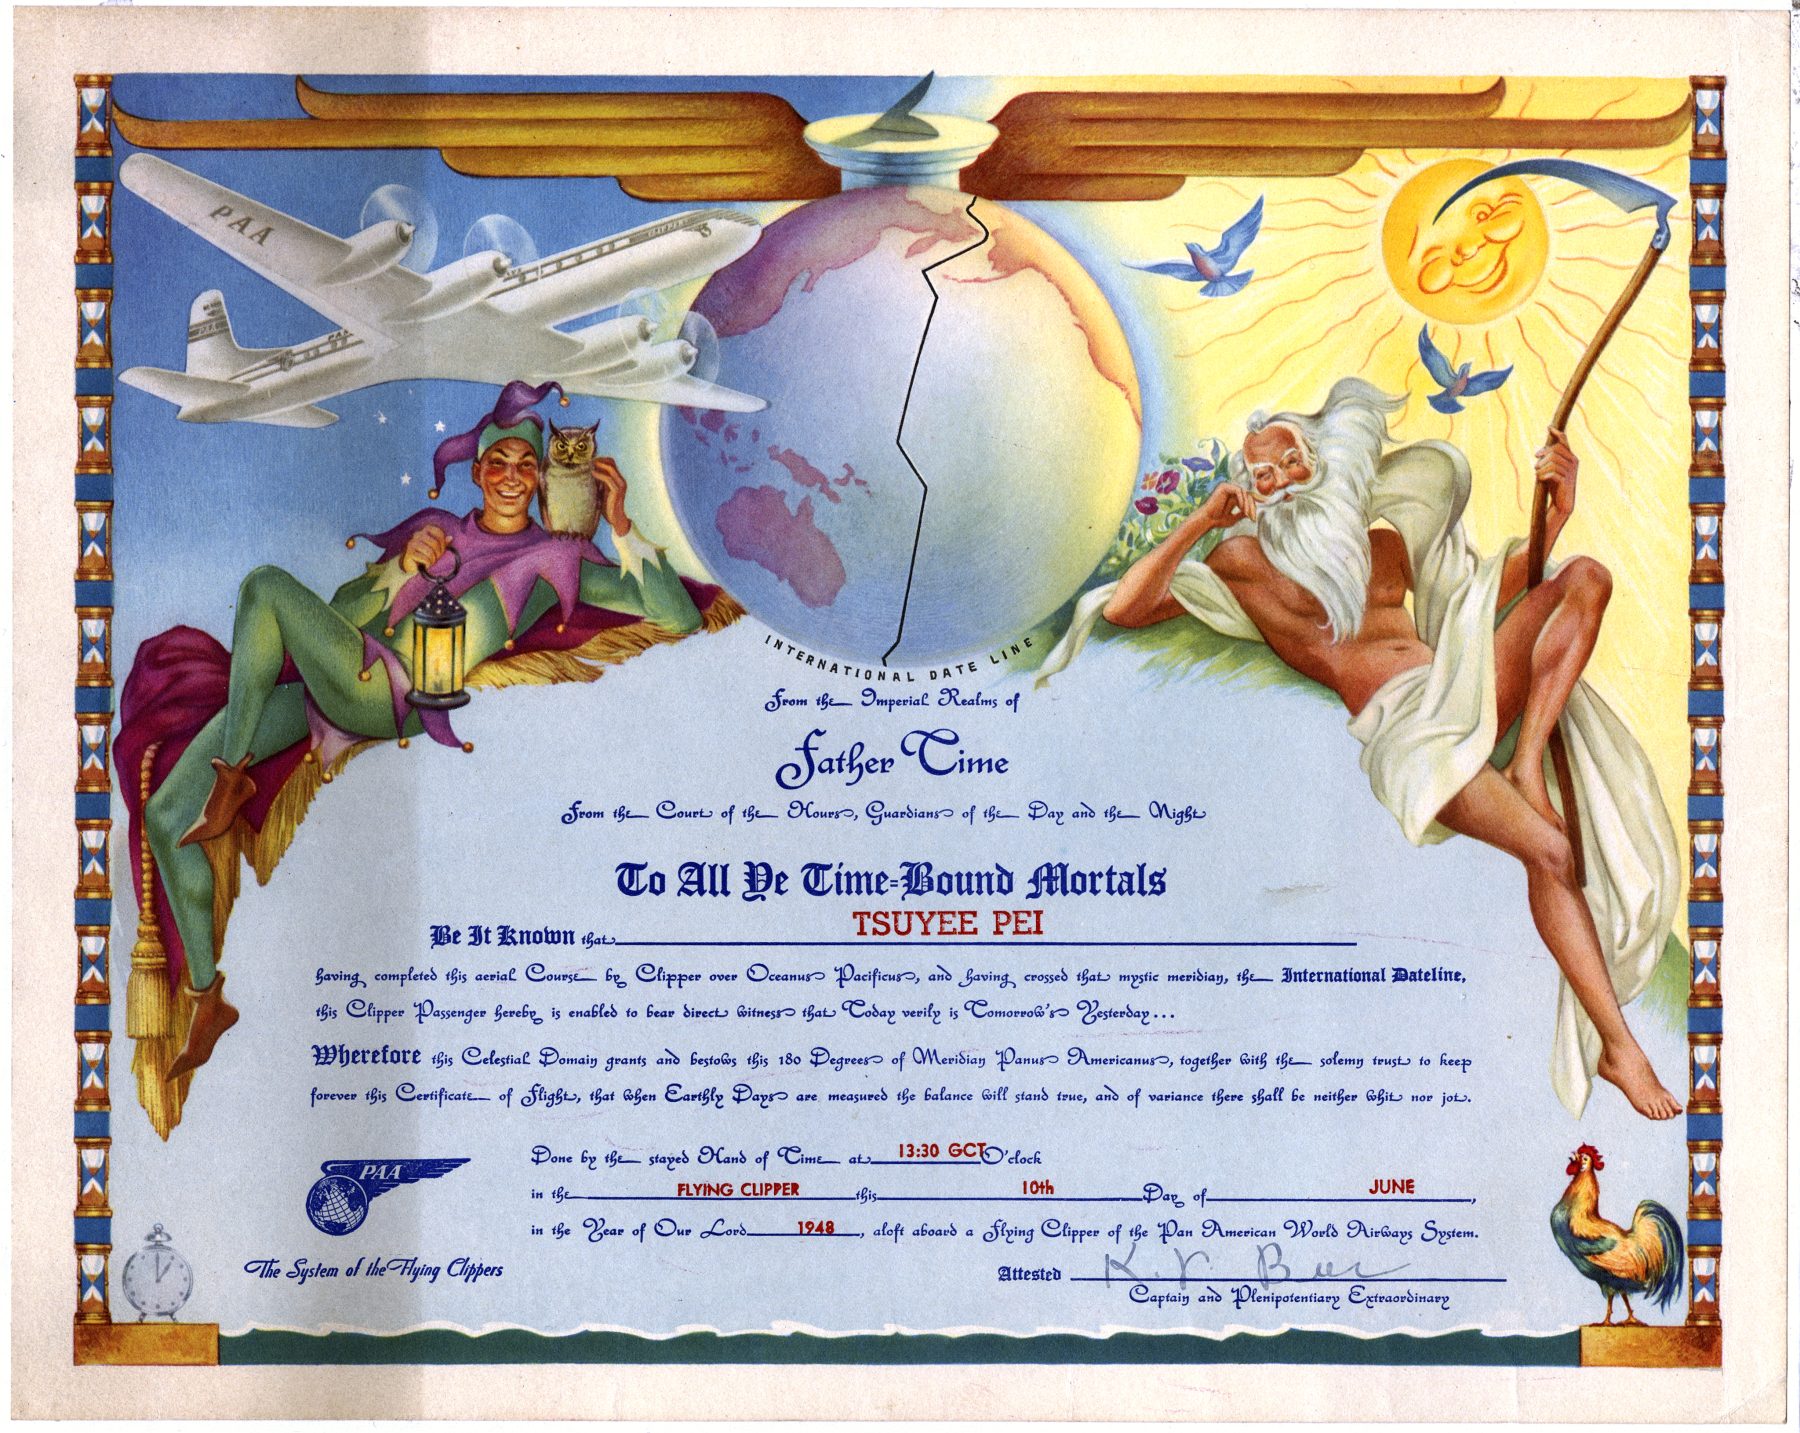 2022.009.001 Pan Am Airways Date Line Crossing Certificate, 1948. Courtesy of Patricia Pei, in Memory of Tsuyee Pei, Museum of Chinese in America (MOCA) Collection.